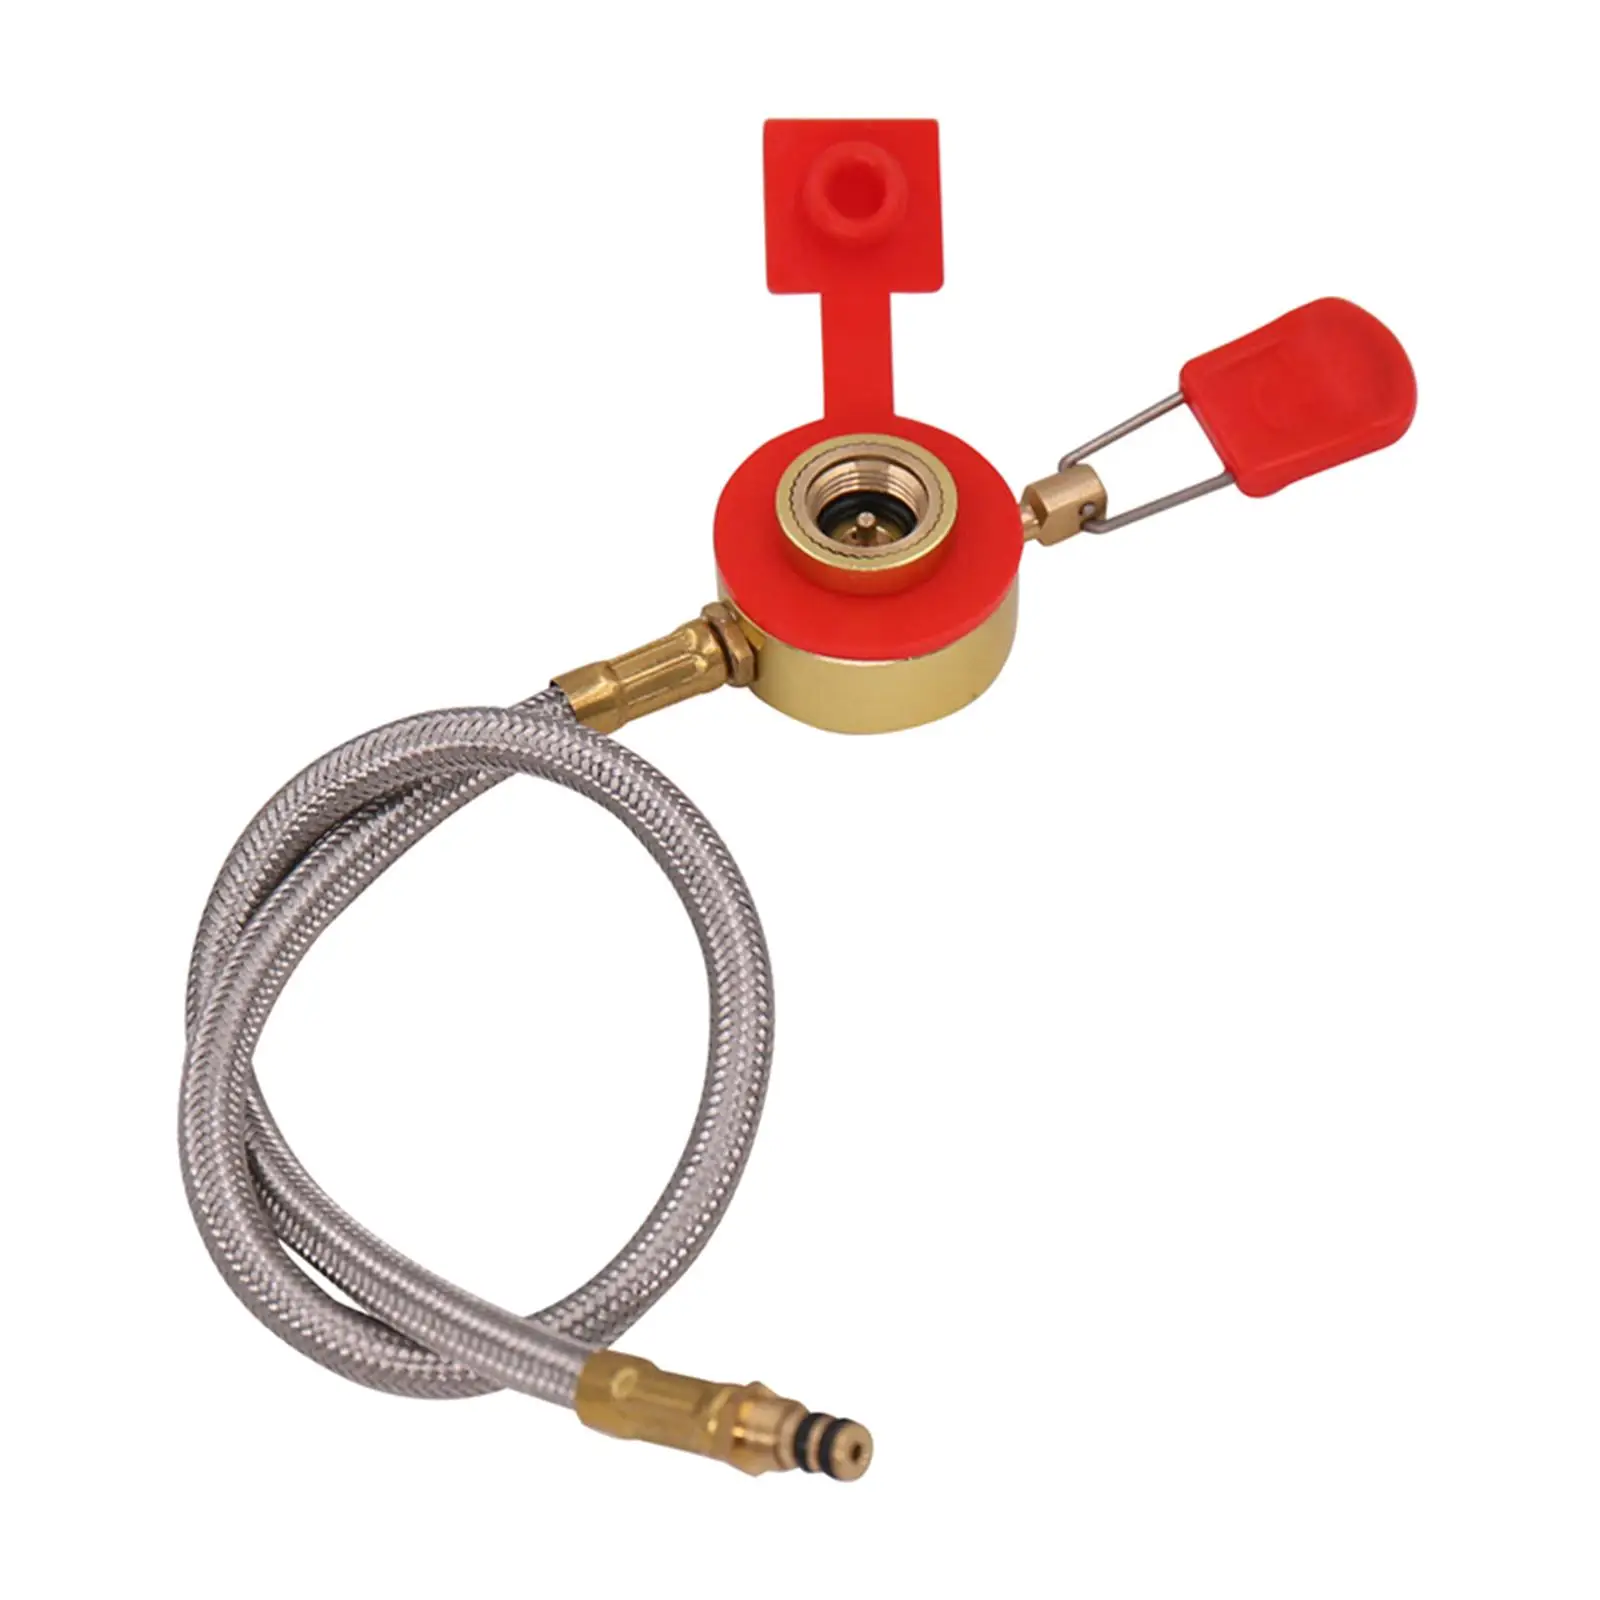 Camping Stove Gas Hose Valve Replacement Stainless Steel Propane Hose Regulator for Hiking Backpack BBQ Picnic Party